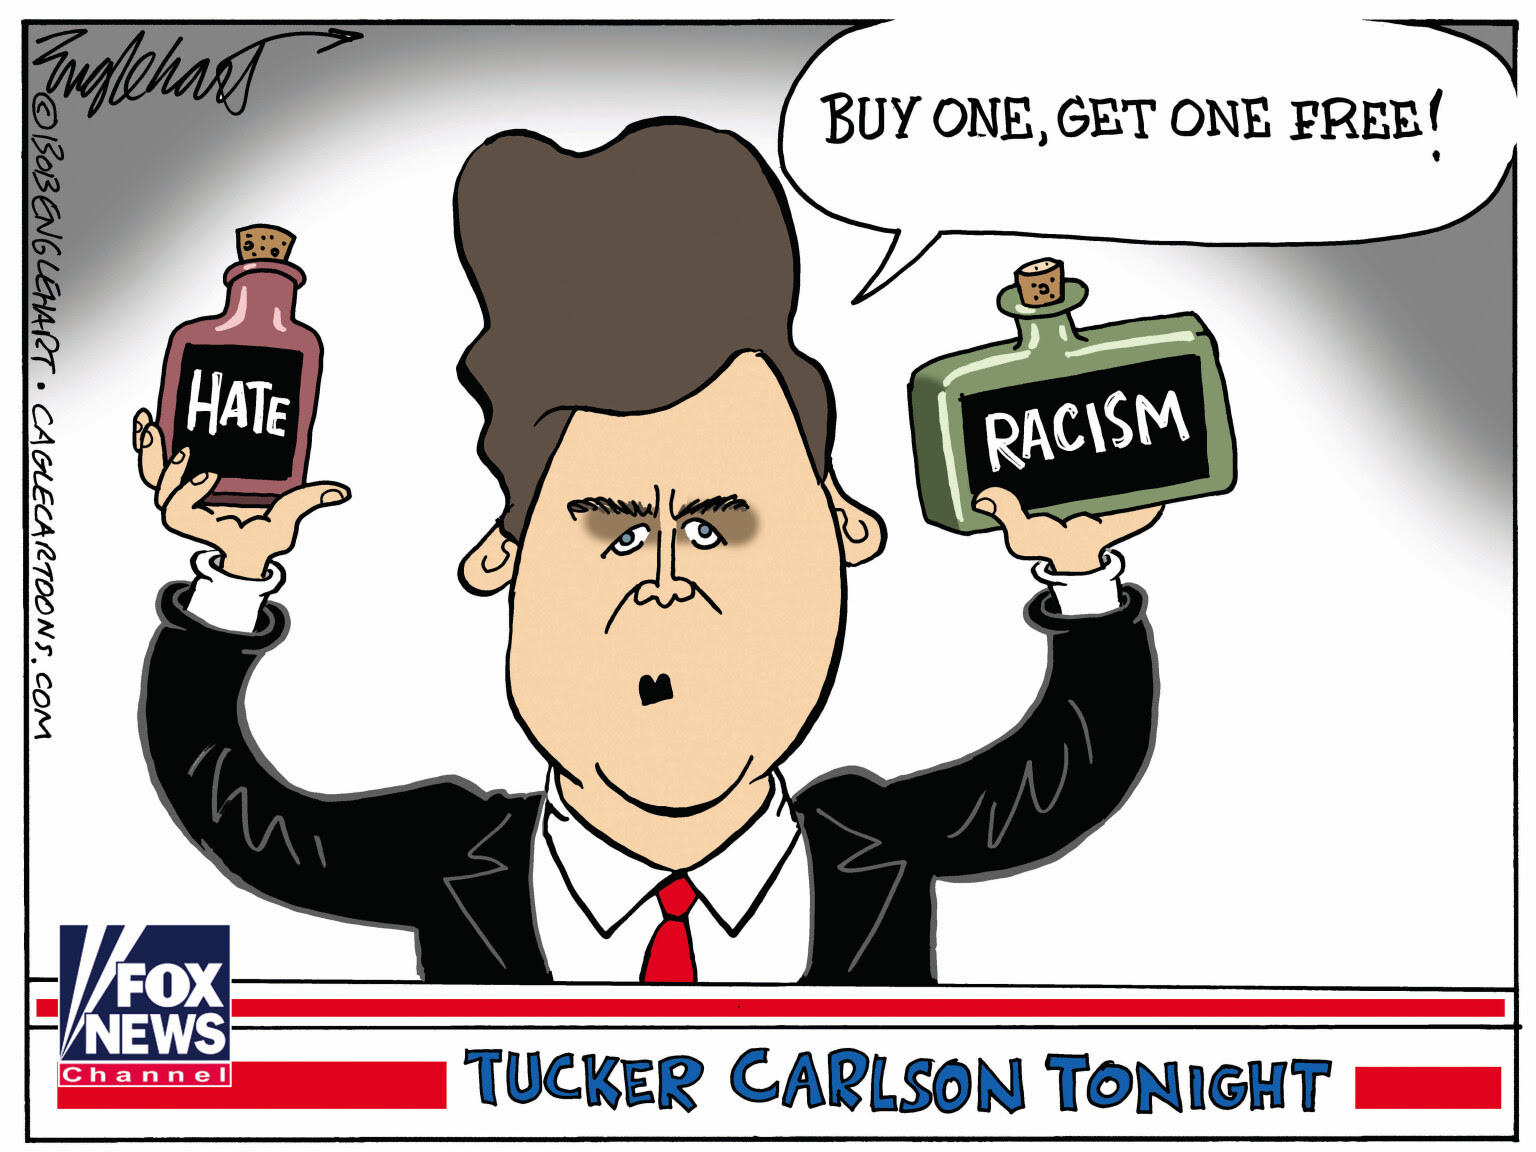 Tucker Carlson and FOX News spread hate and racism. Replacement Theory.